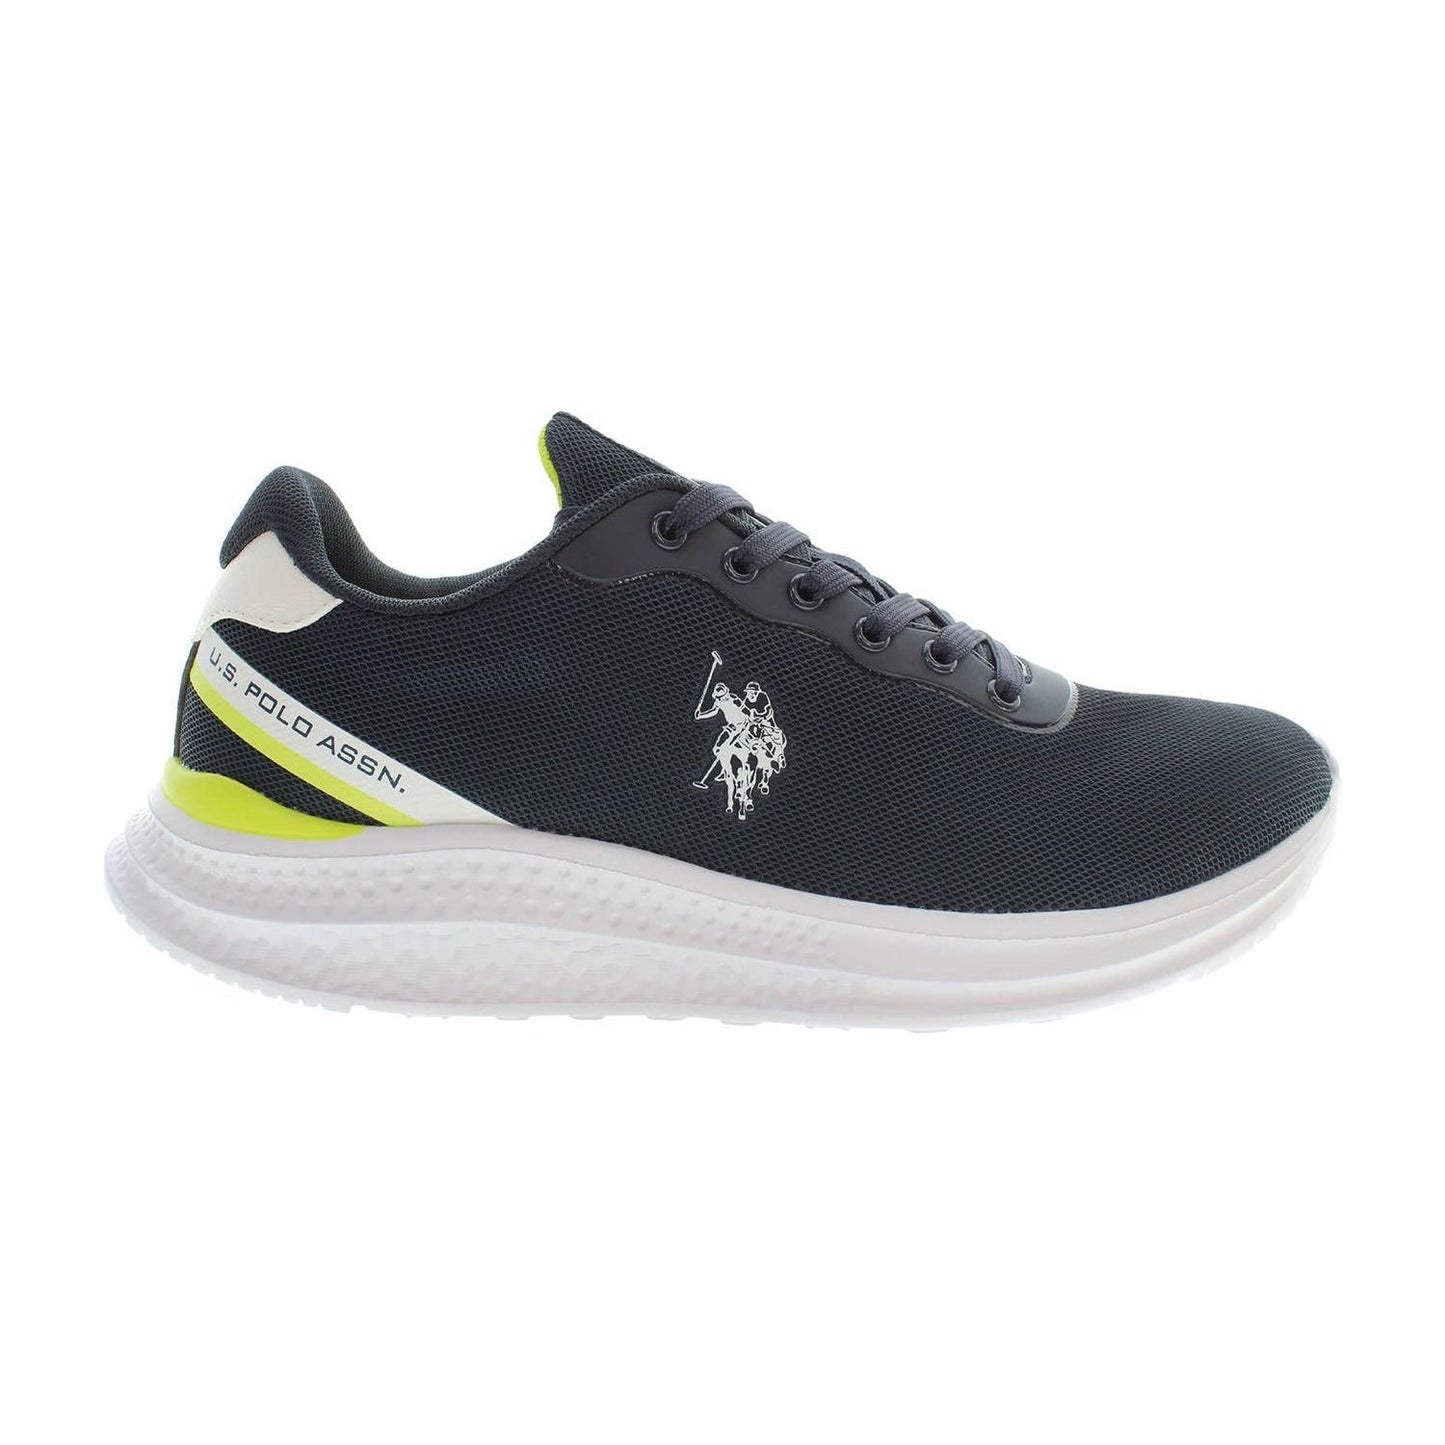 U.S. POLO ASSN.Elevated Blue Sneakers with Logo DetailMcRichard Designer Brands£89.00